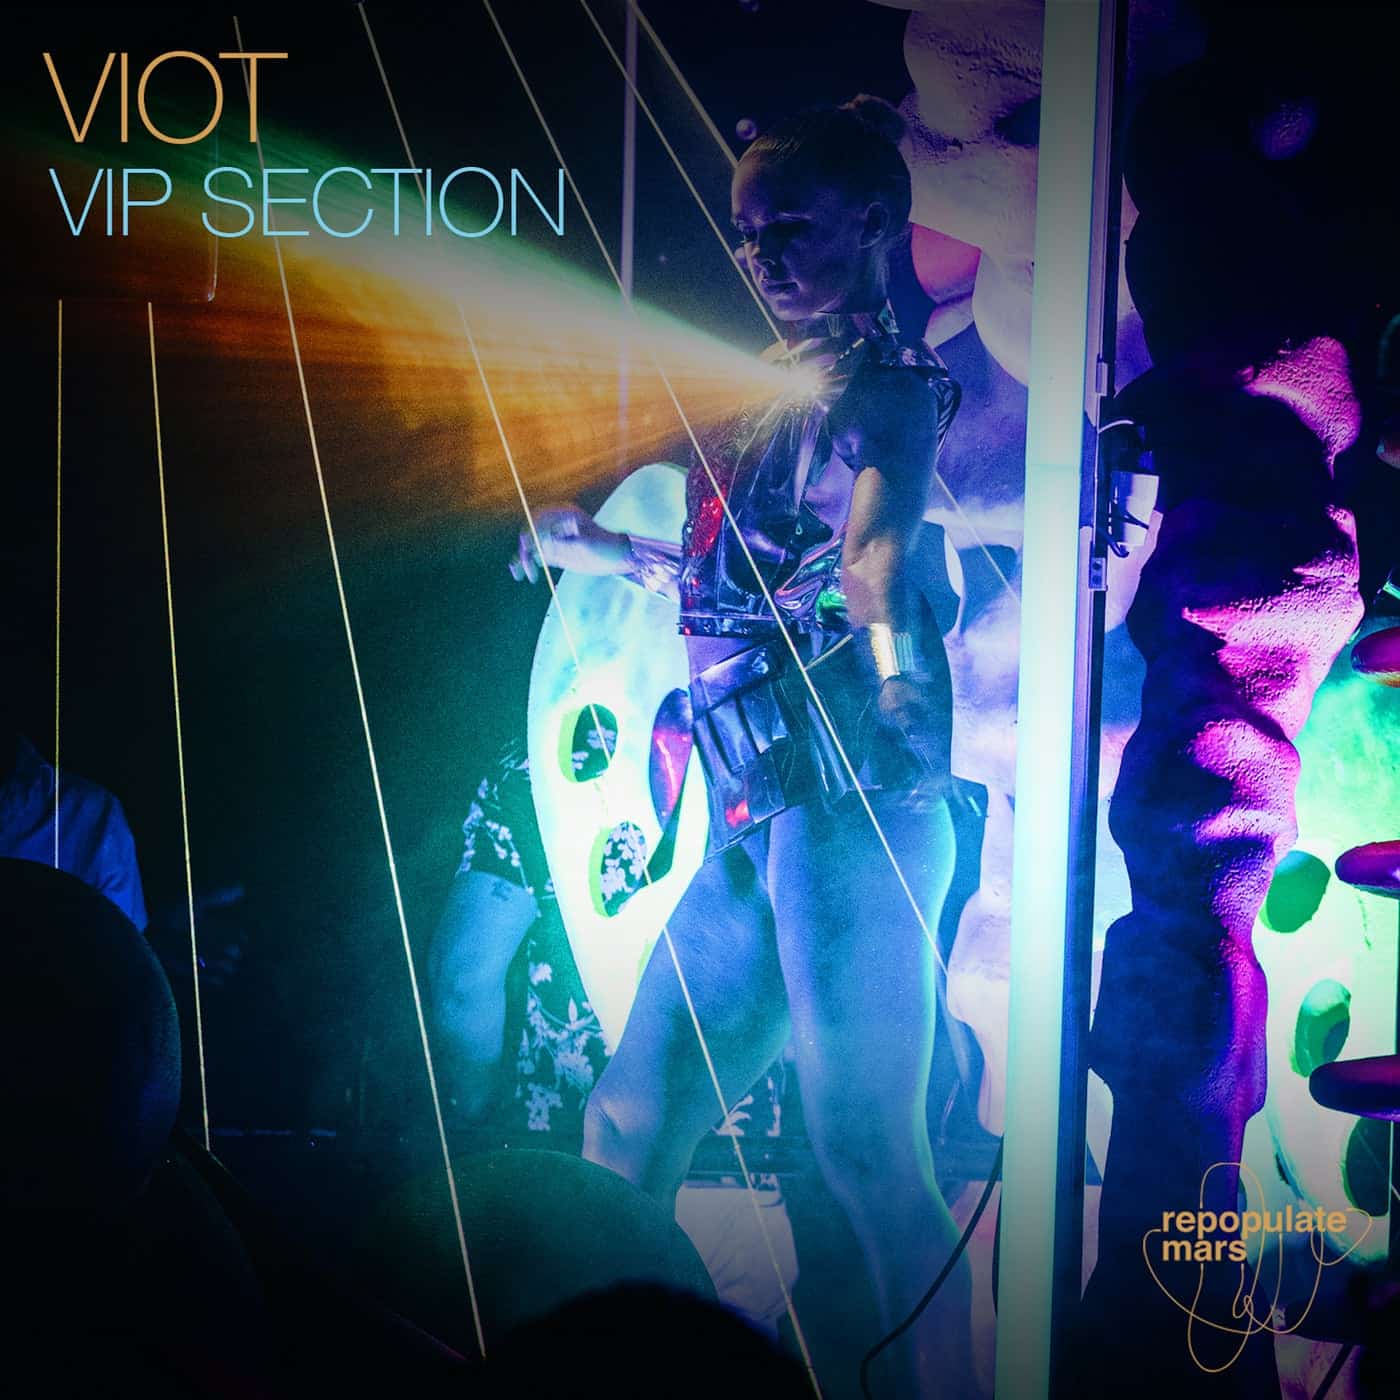 Download Viot - VIP Section on Electrobuzz